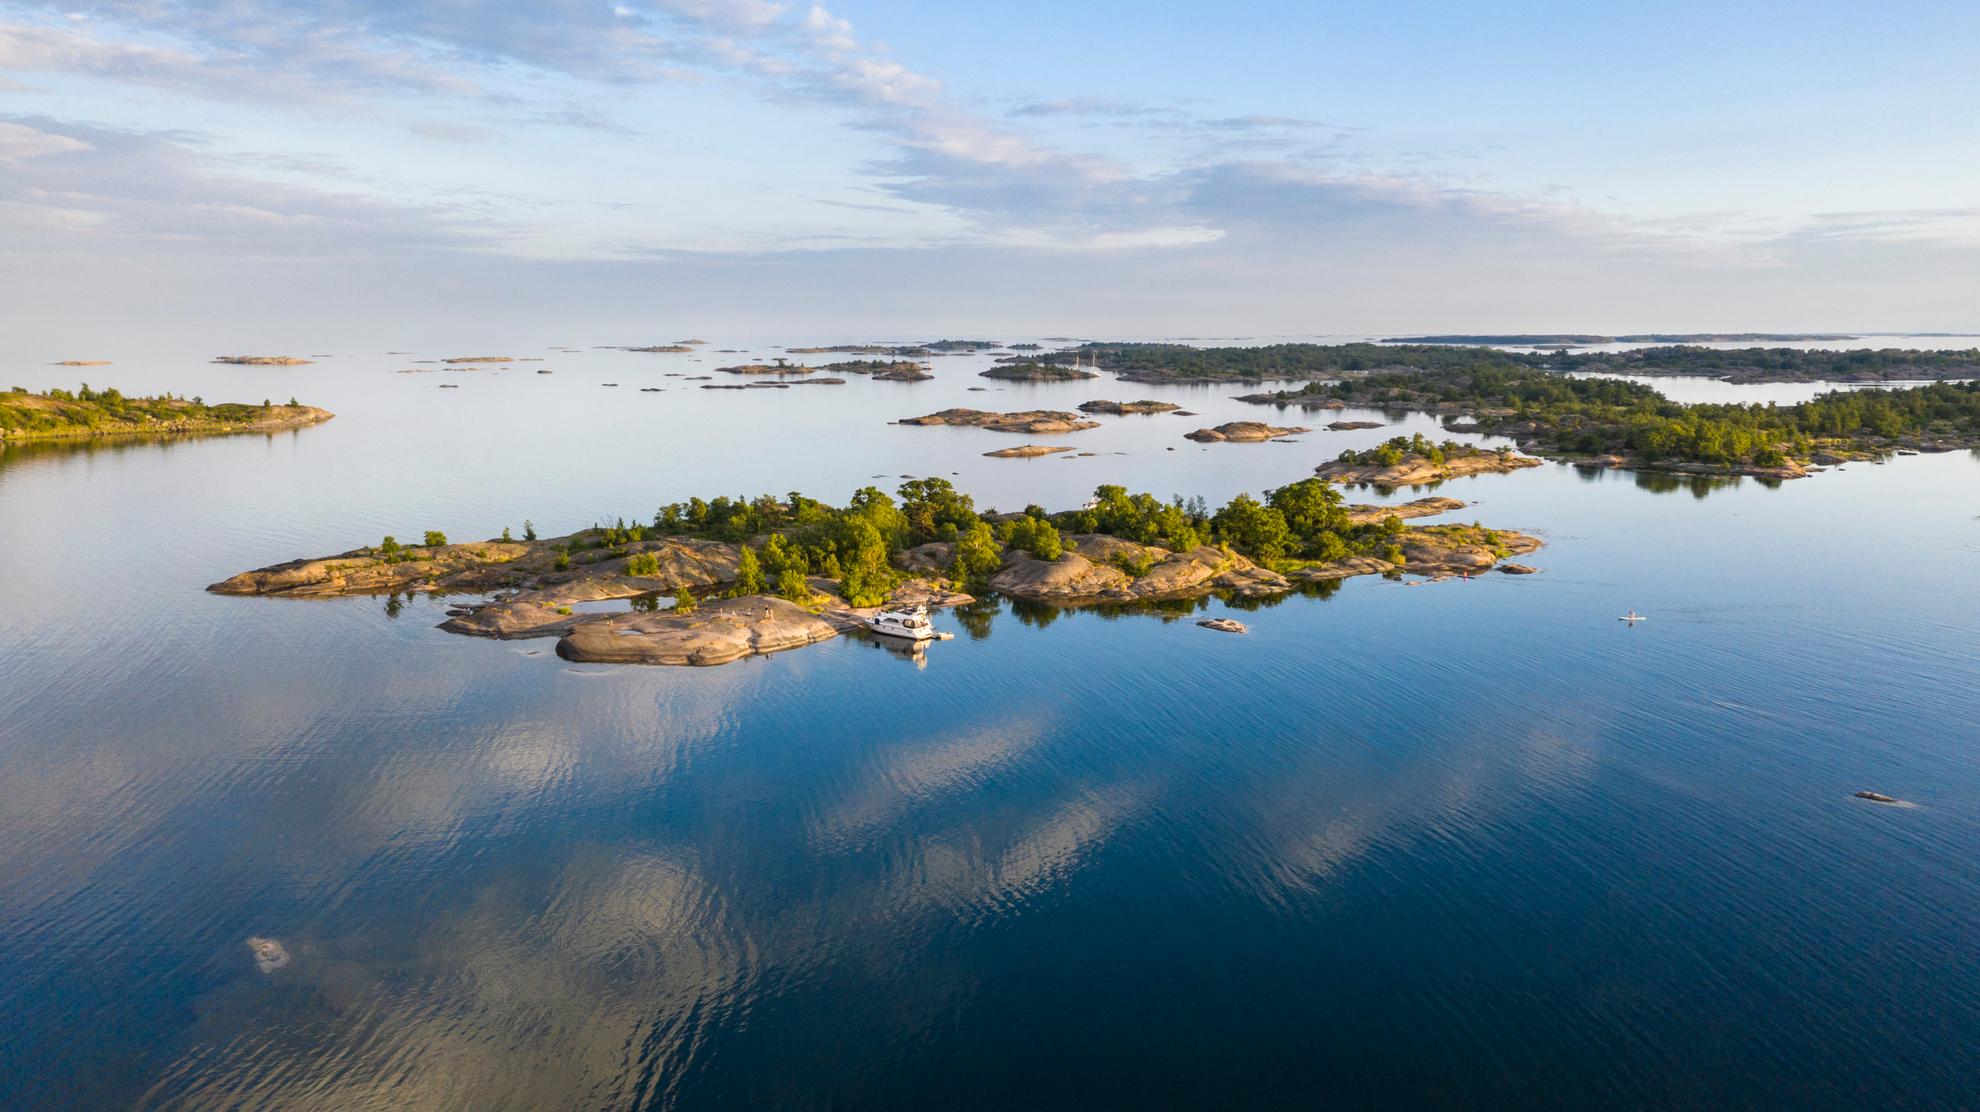 Aerial image of a boat next to an island in the Stockholm archipelago during a summer day.